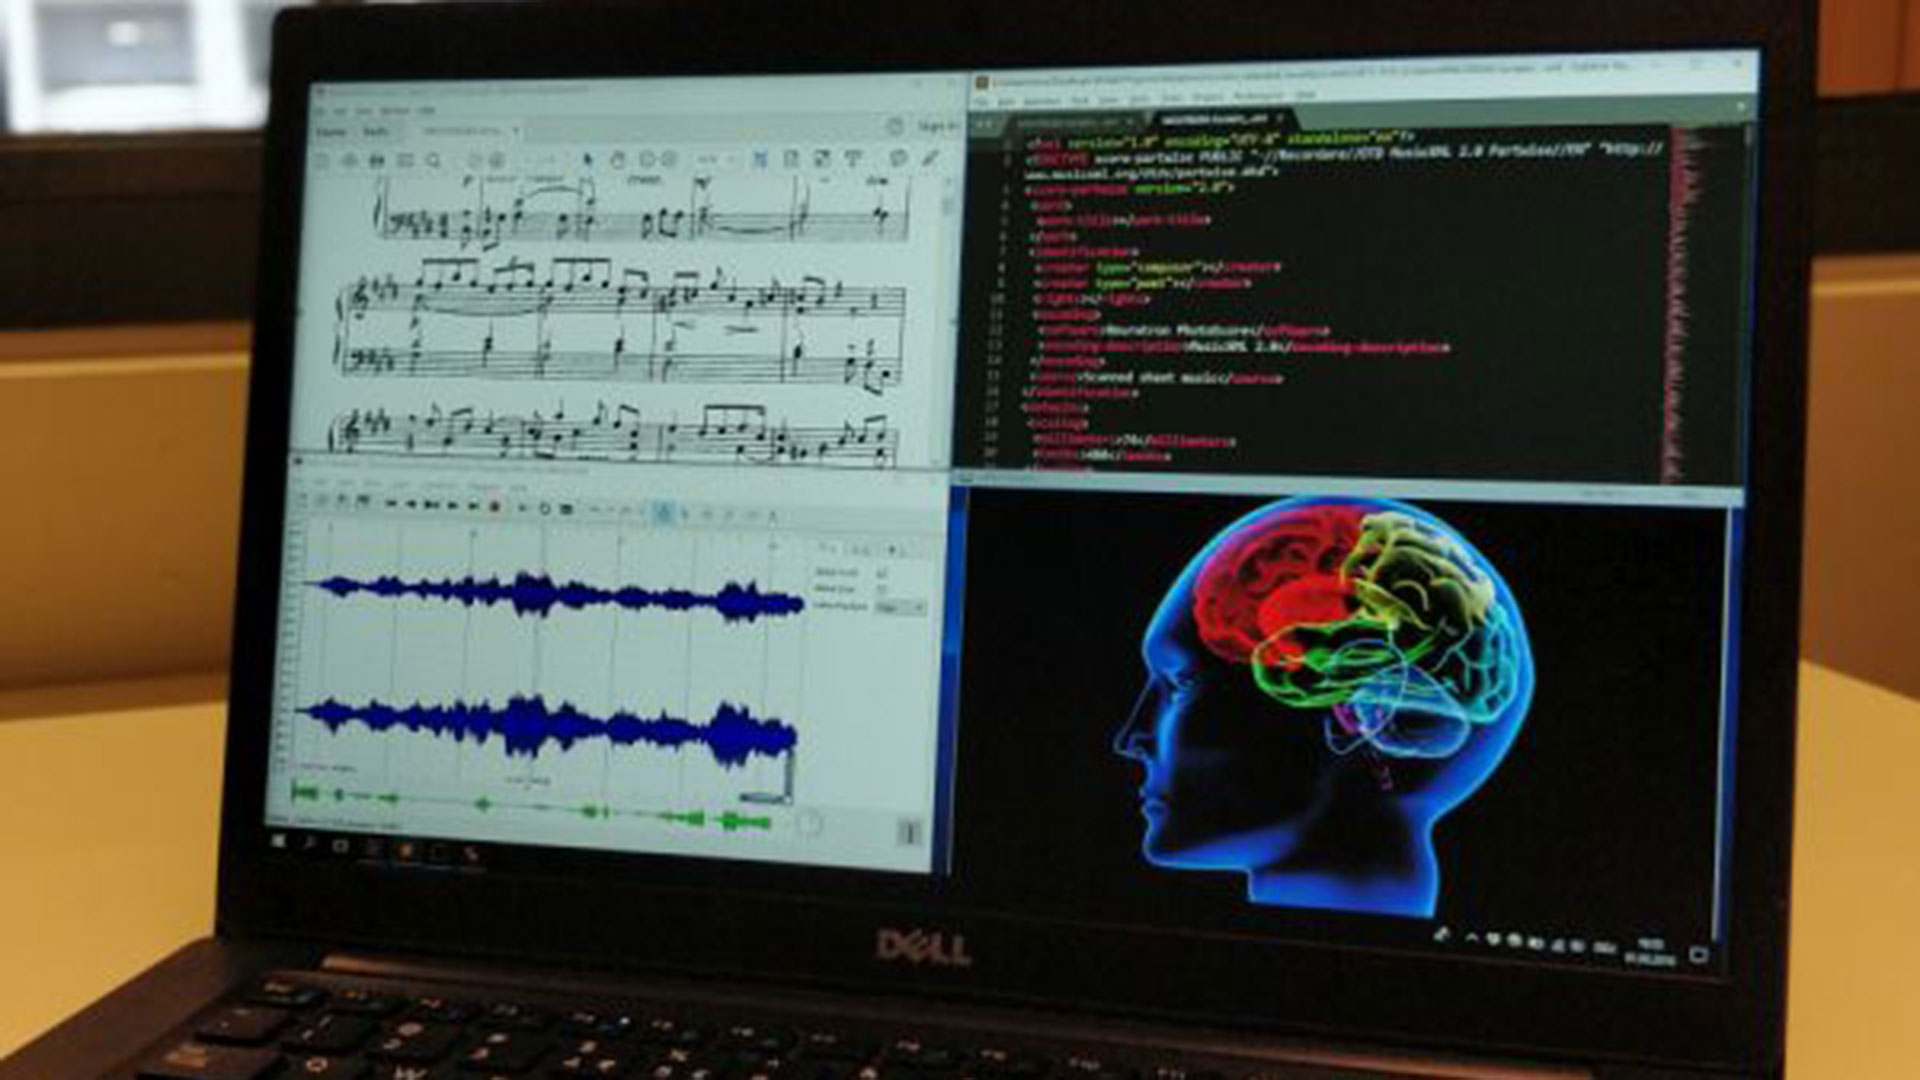 Music score and brain image on a computer screen